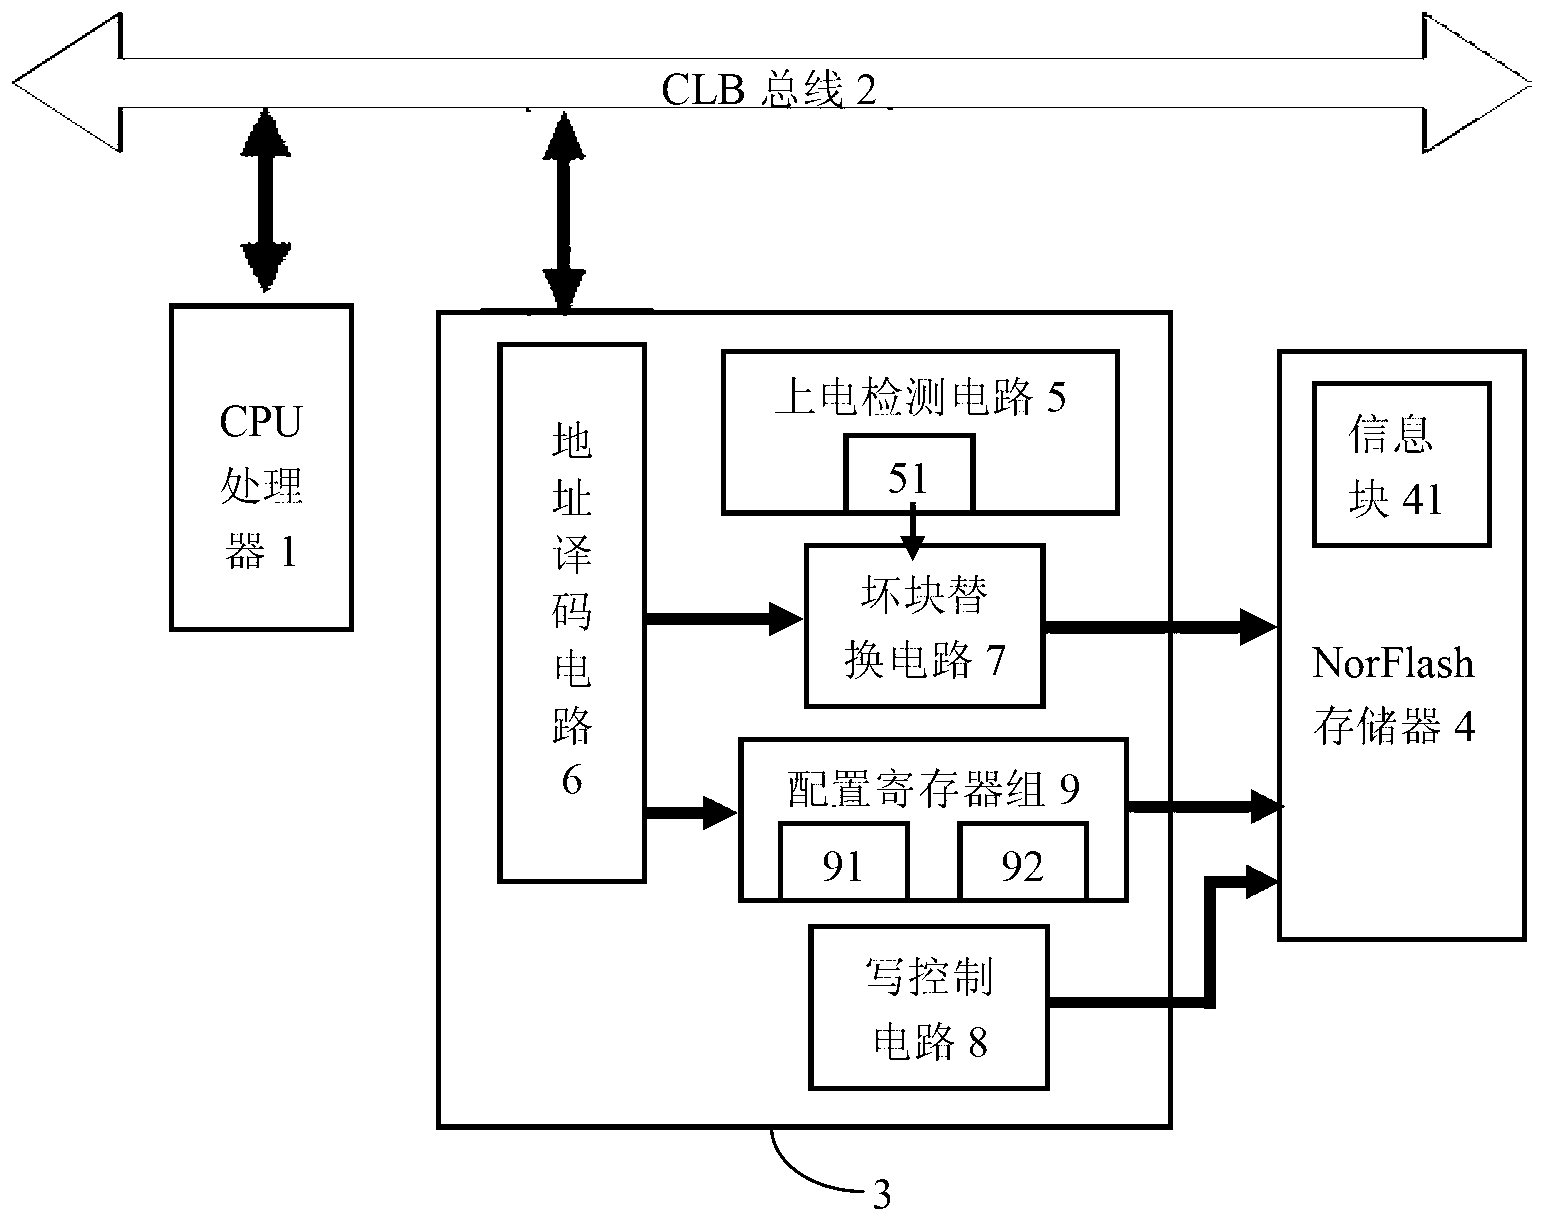 CLB-bus-based NorFLASH memory interface chip with high utilization ratio